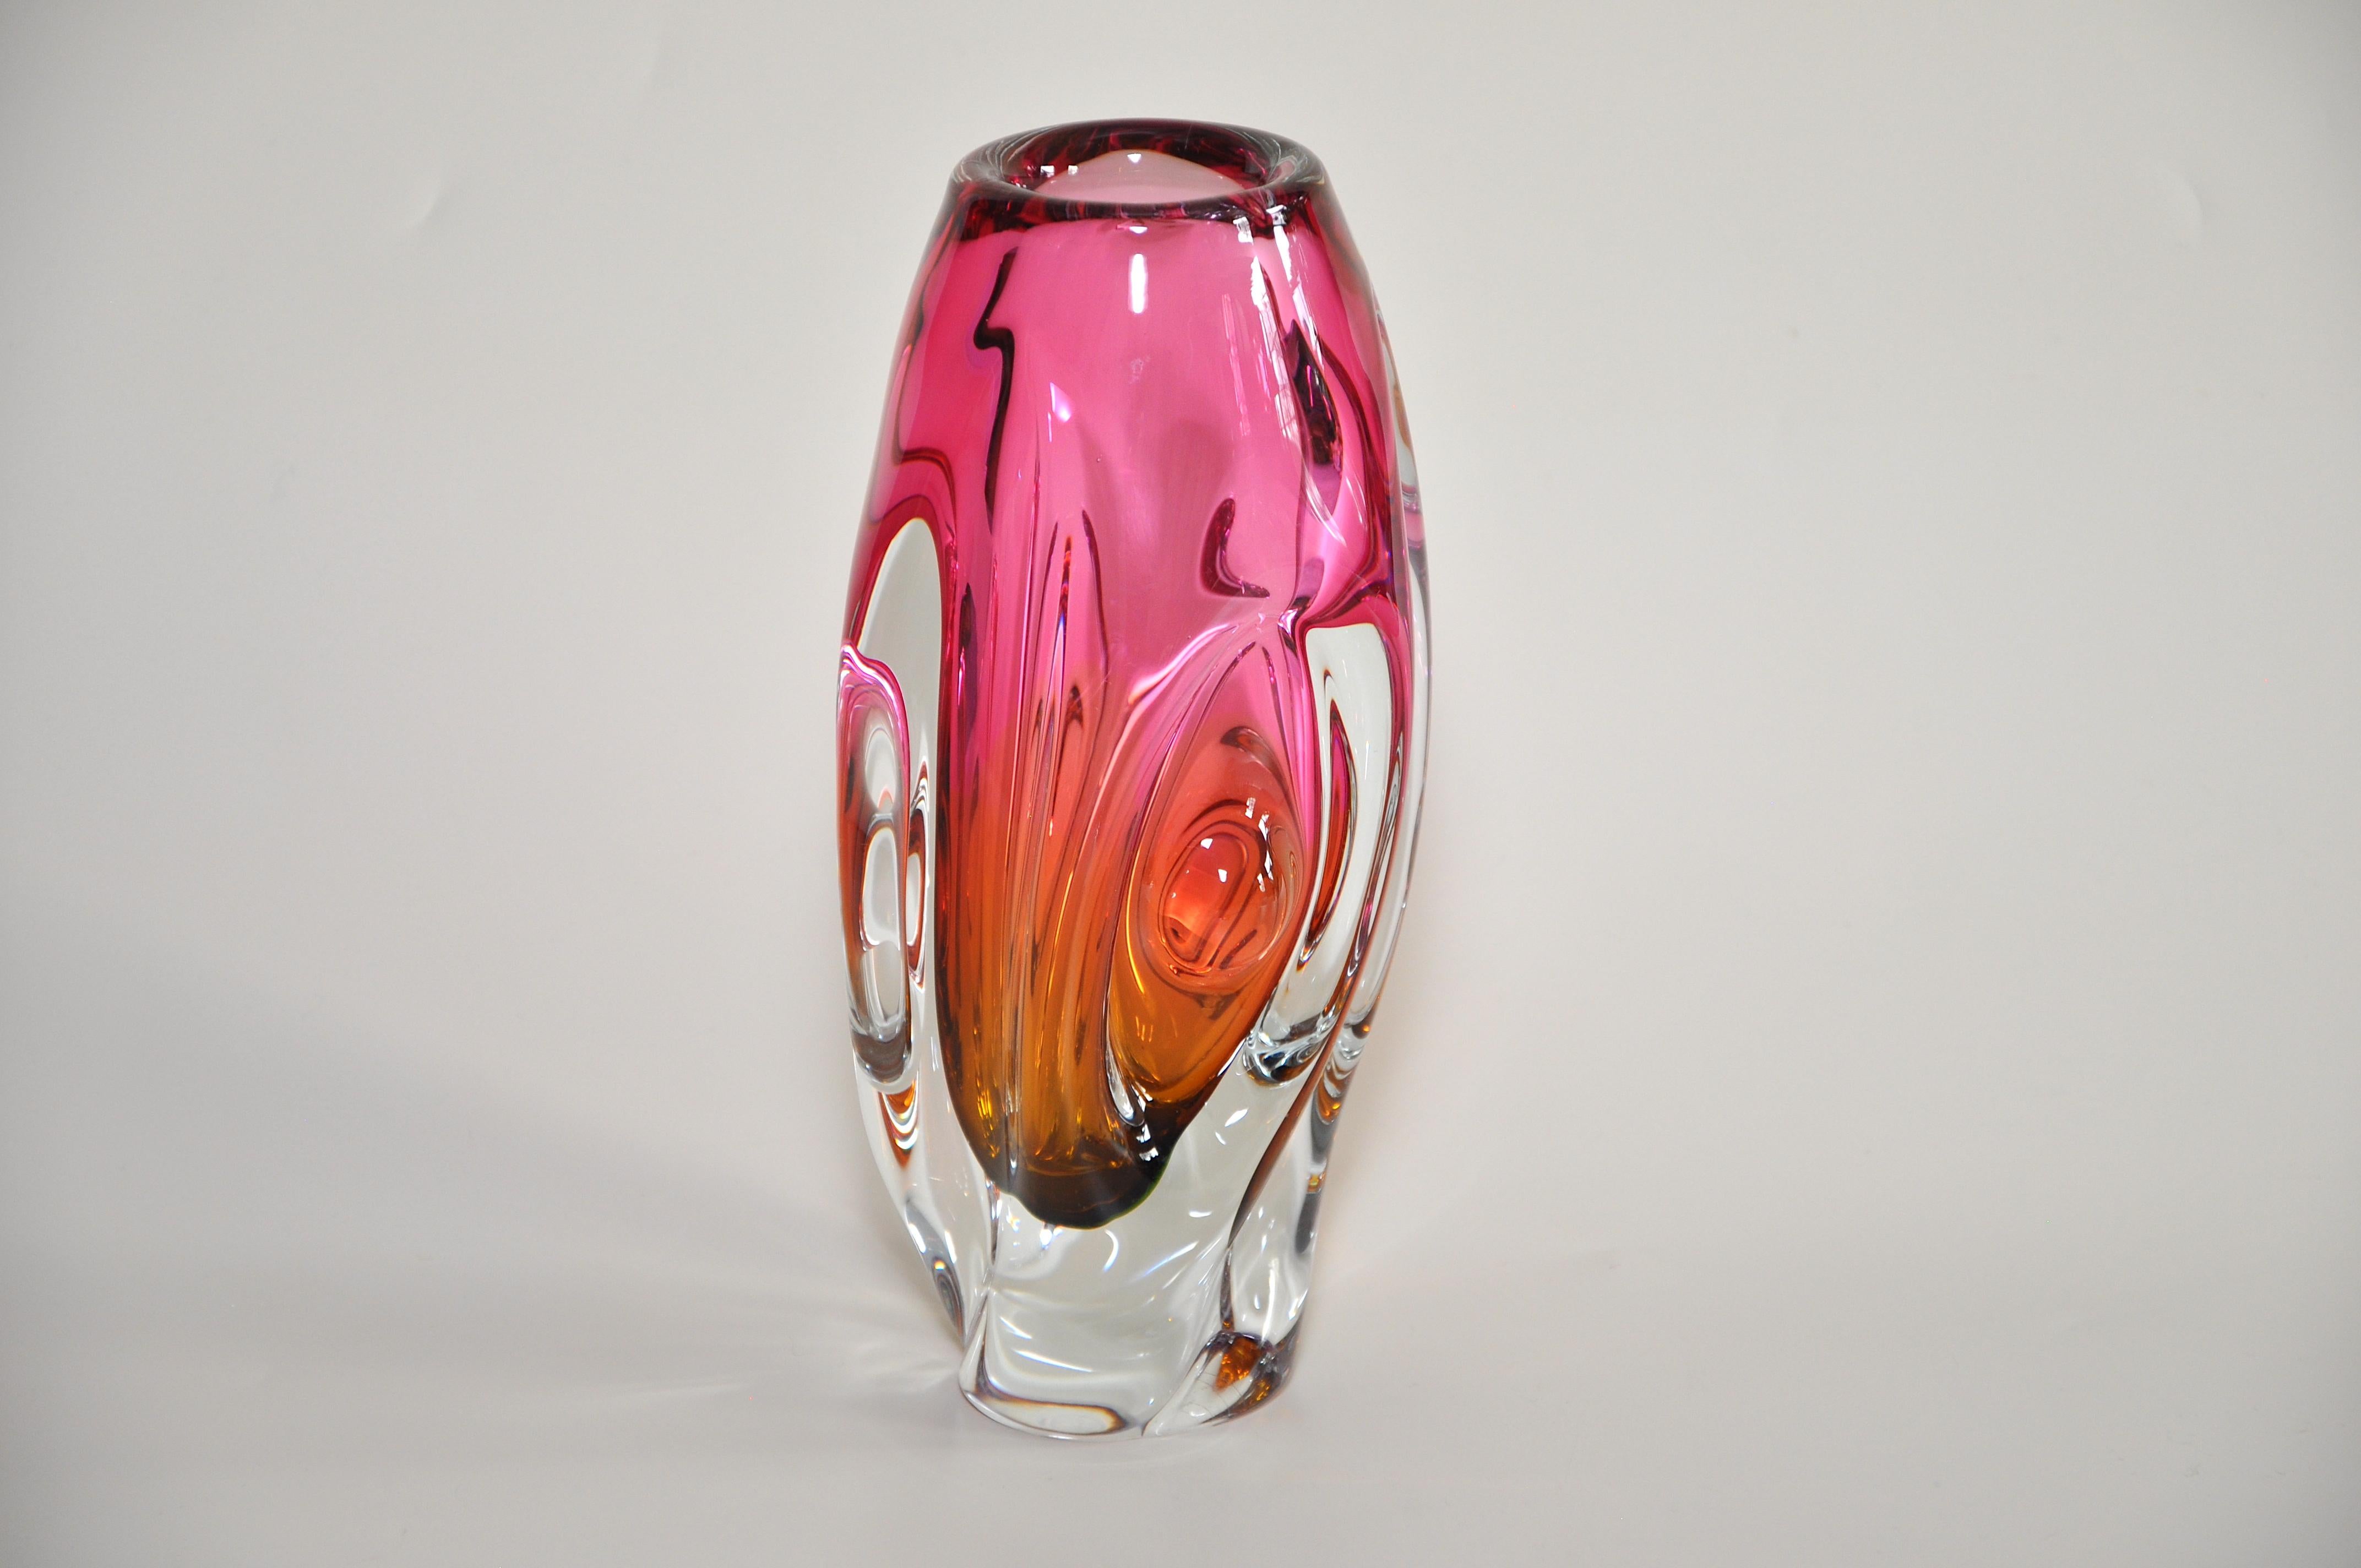 Title:
Stunning Vintage Pink Orange Art Glass Bowl Italian 

Description:
A stunning vintage piece of art glass in a strong molten pink blending into warm, rich rusty orange hue. This piece is wonderful as it would look great matched with antique or